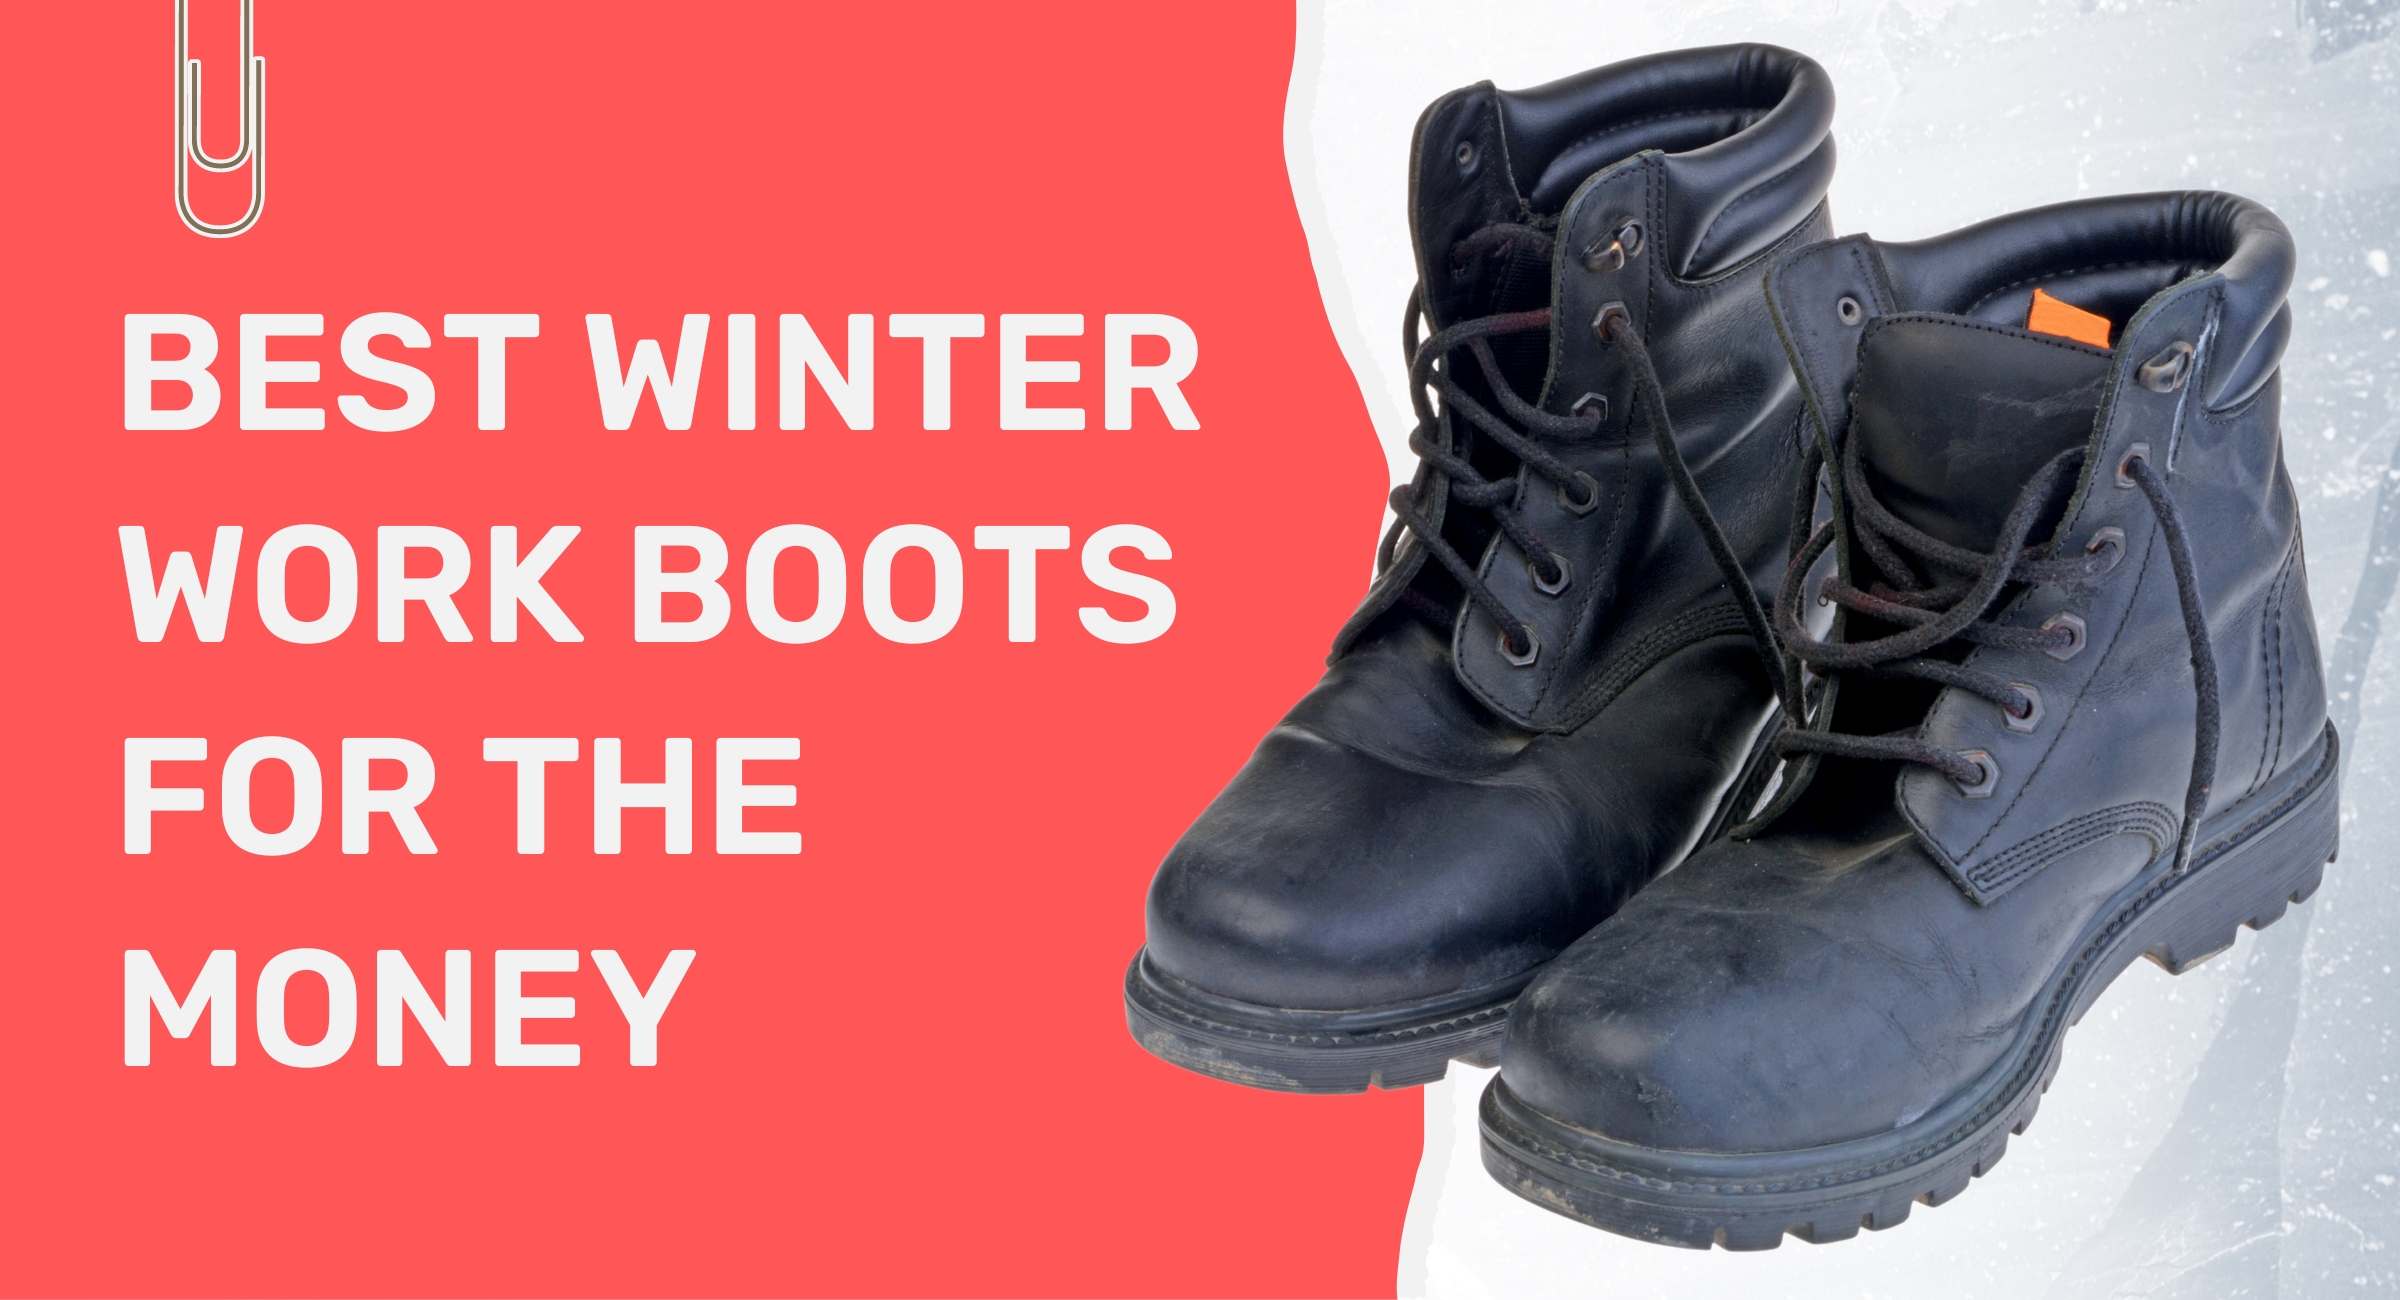 Best Winter Work Boots For the Money